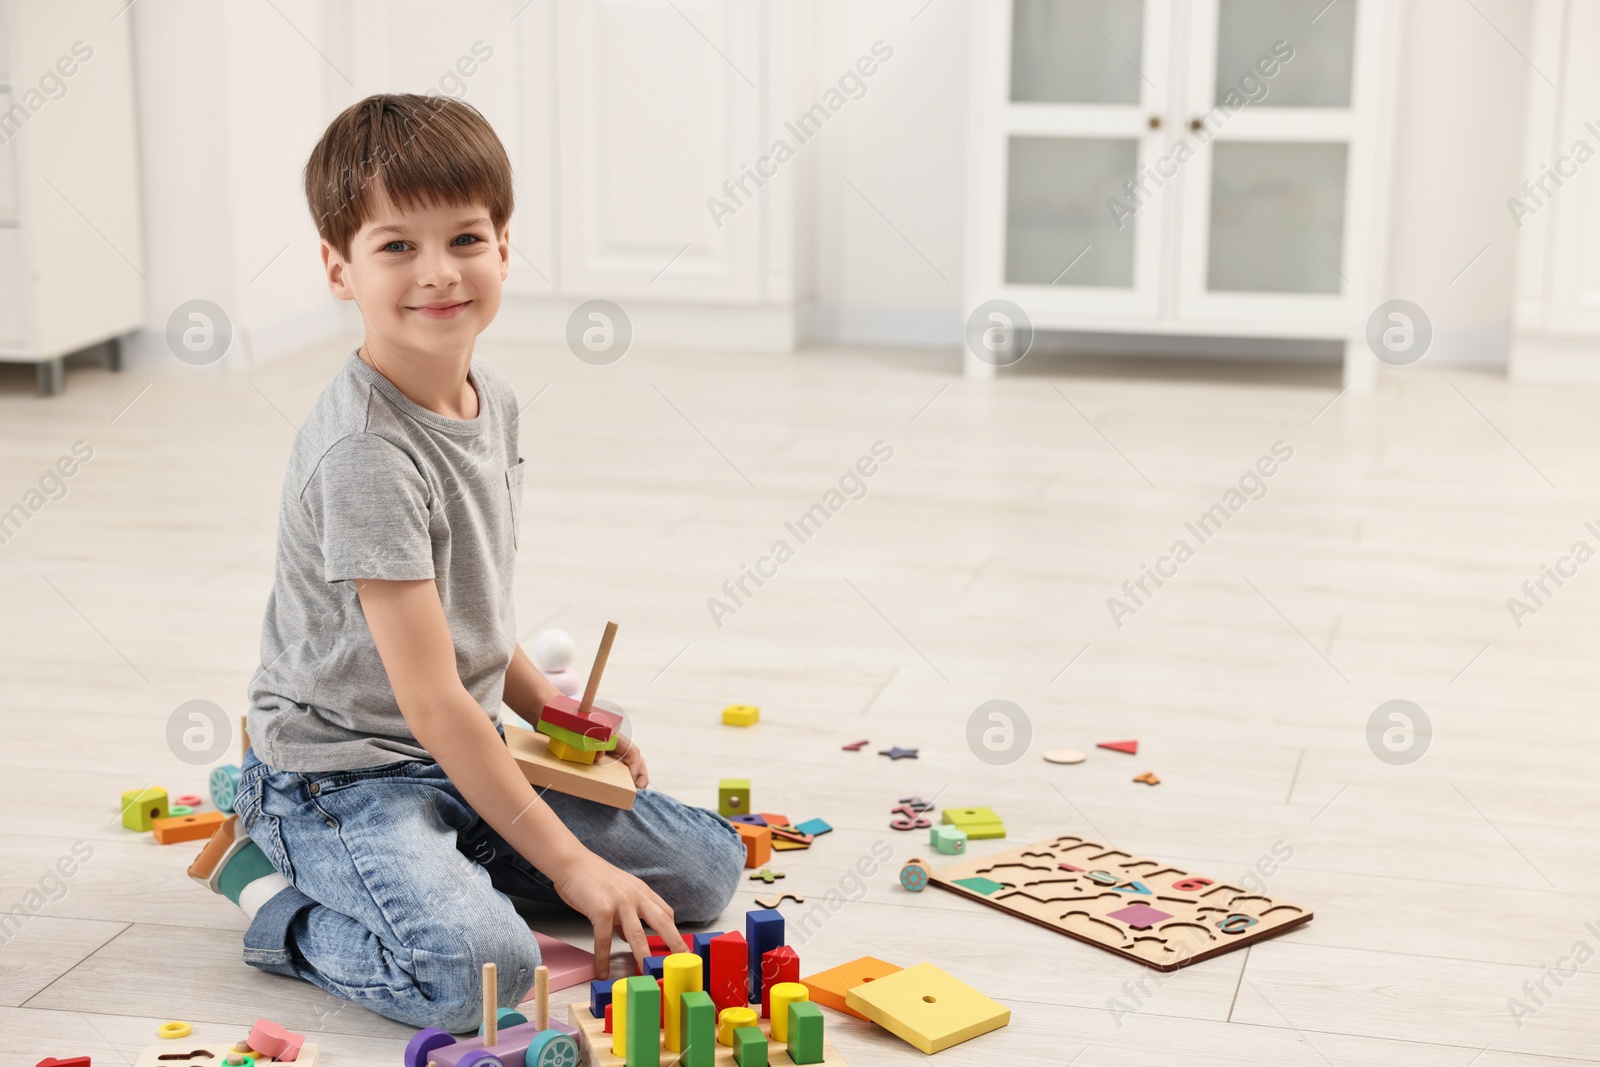 Photo of Cute little boy playing with toy pyramid on floor indoors